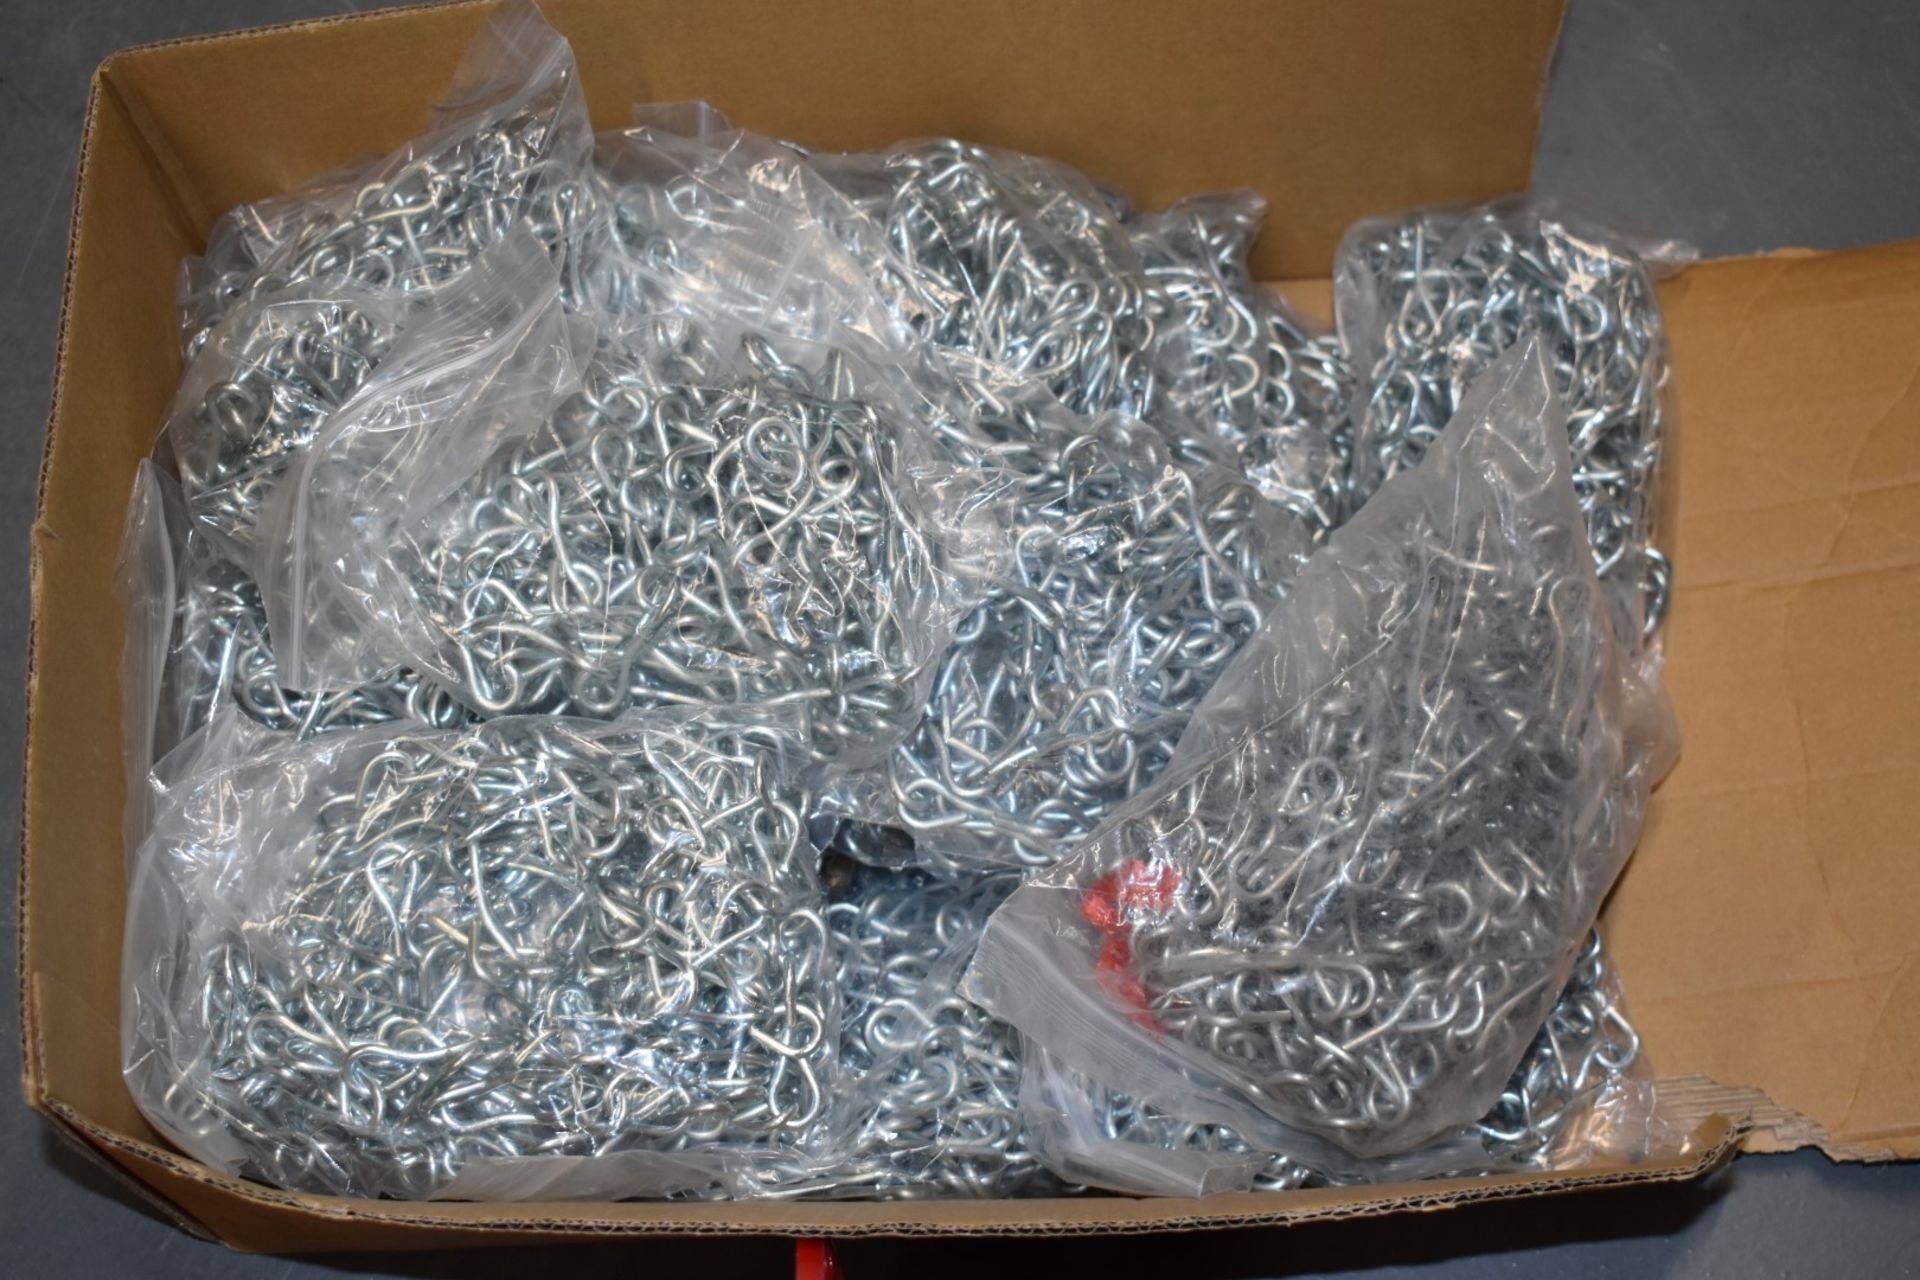 1 x Assorted Lot of Link Chain - Includes 175' Link Chain Reel, 20 Bags of Chain and Box of Chain - Image 6 of 9